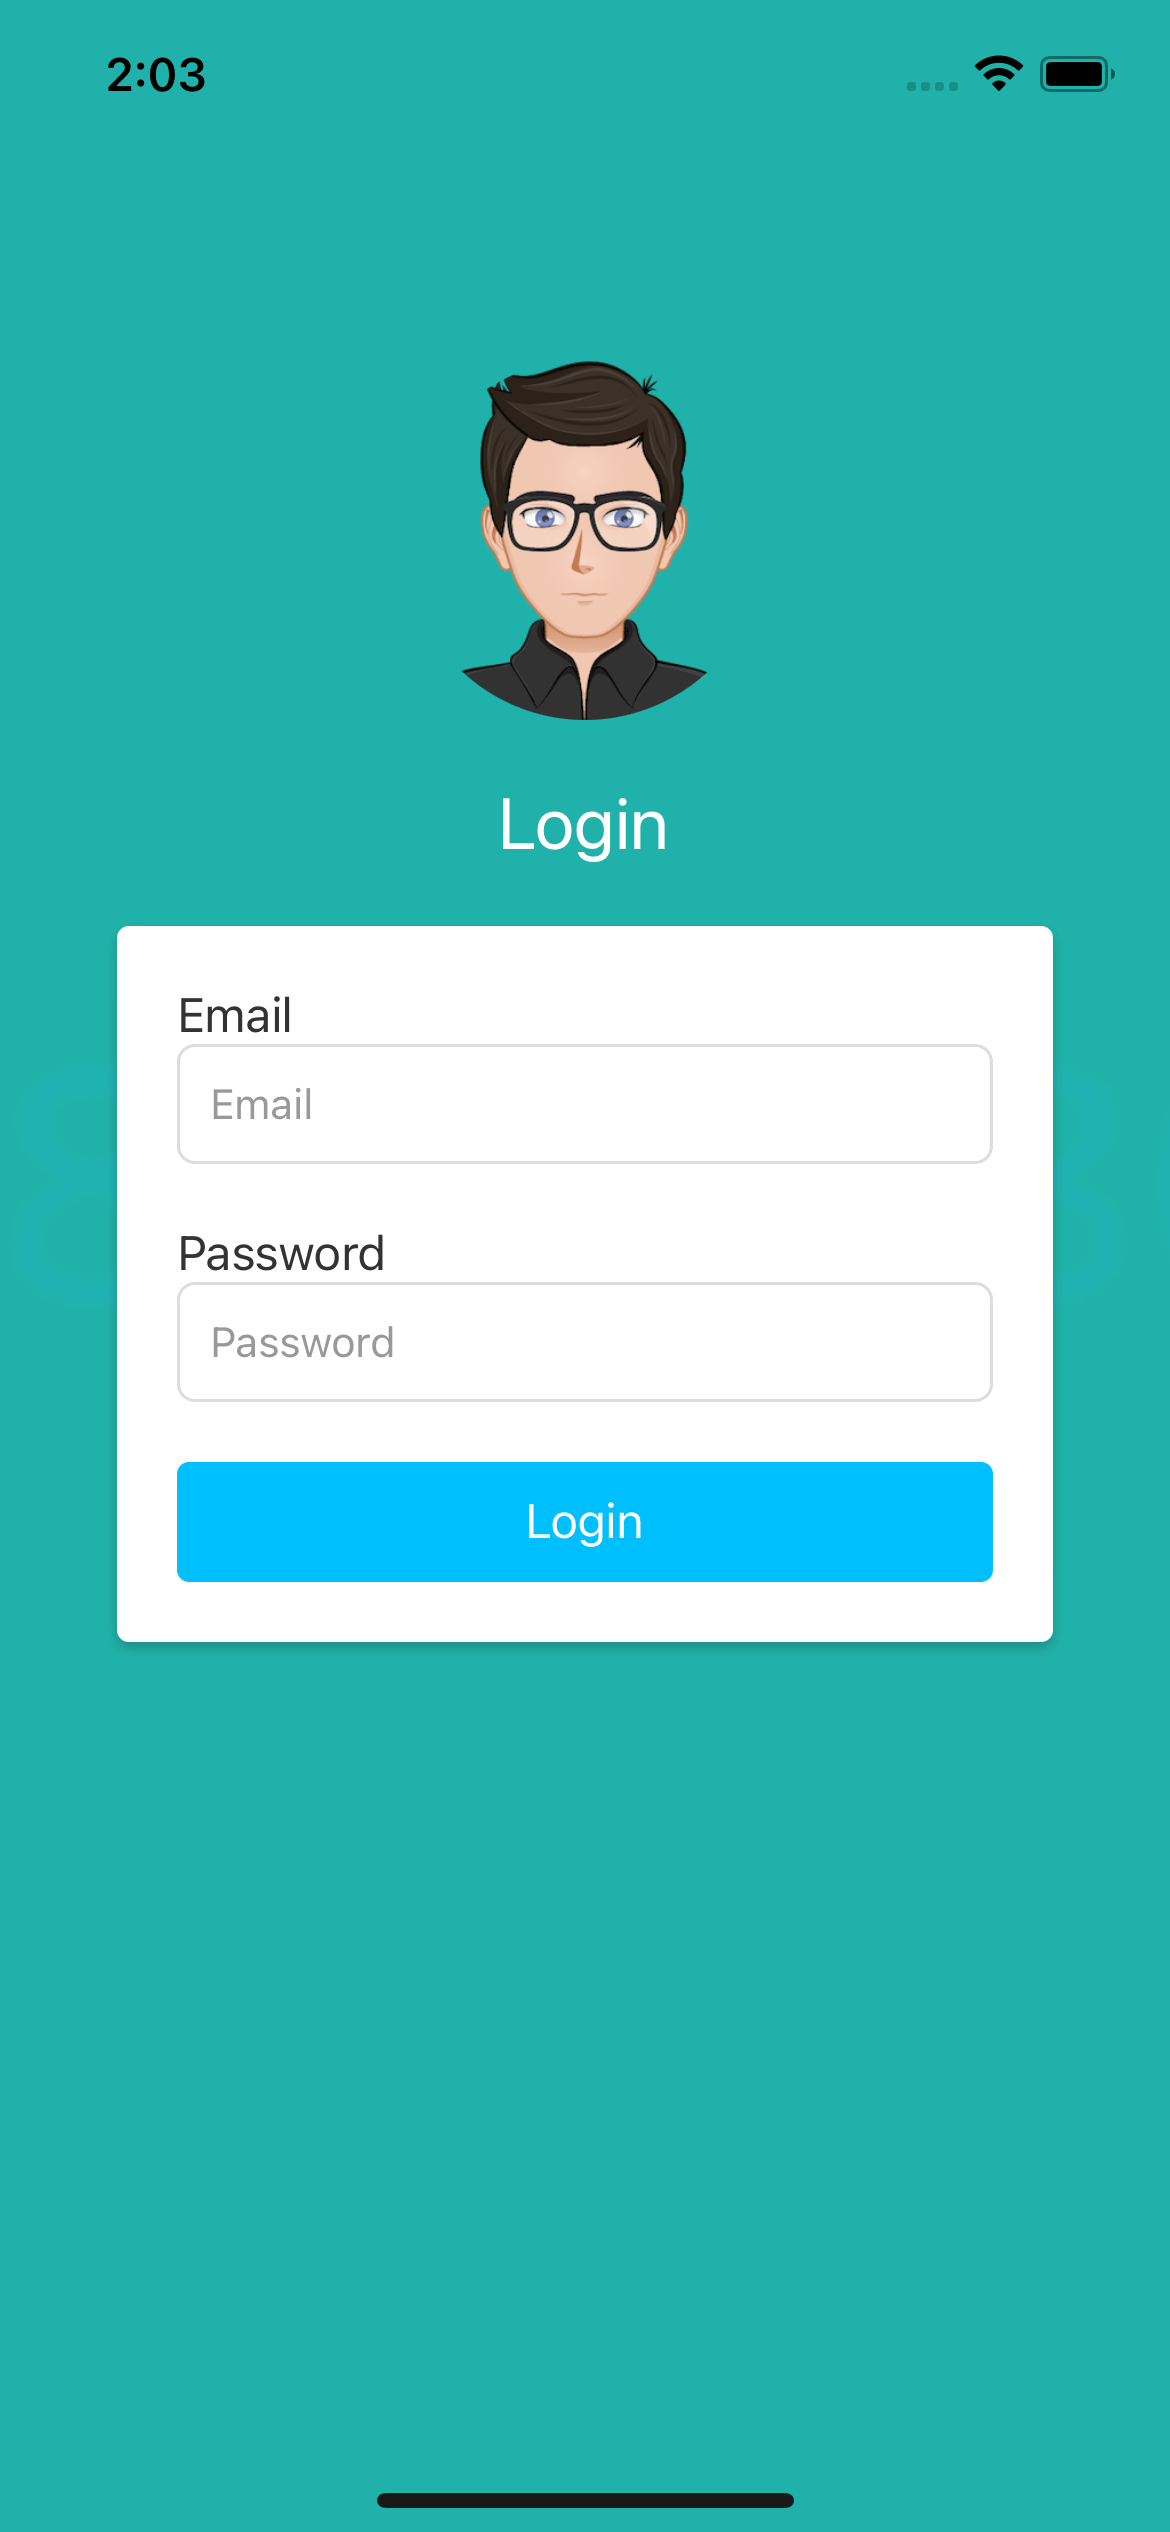 React native template. Login Screen with background and logo